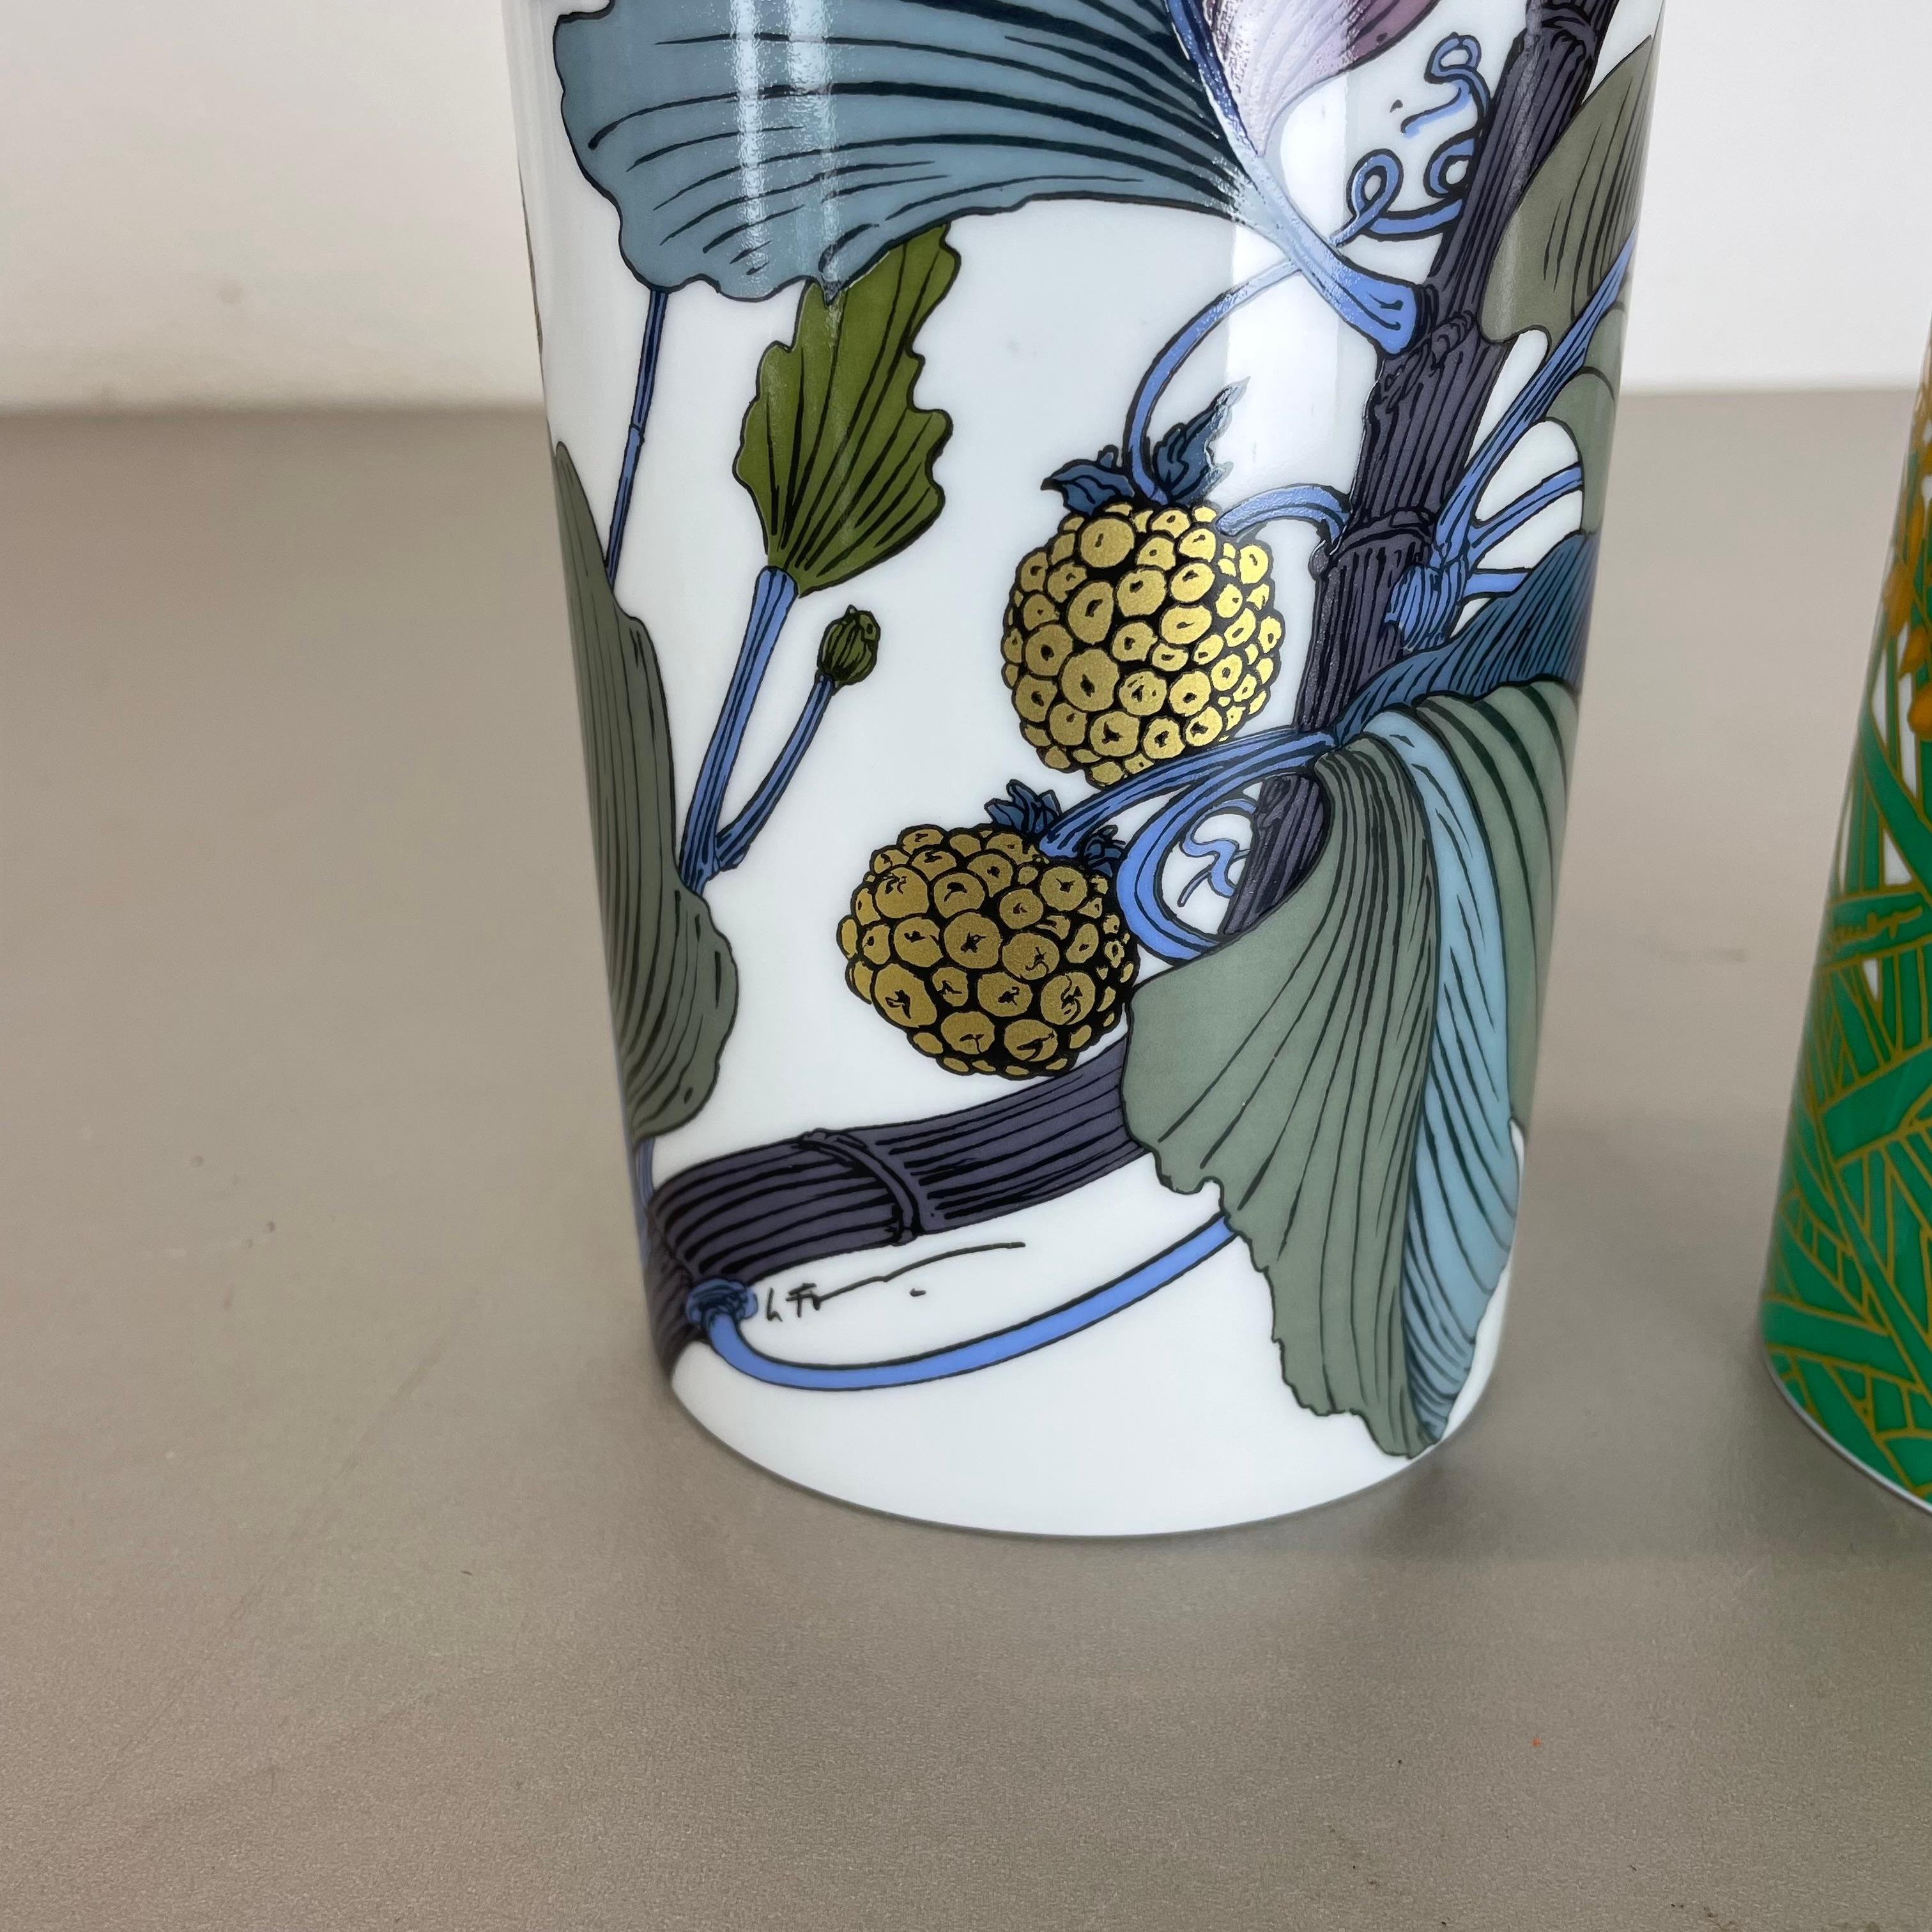 Set of 2 Floral Vases by W. Bauer and A. Le Foll for Rosenthal, Germany, 1980s In Good Condition For Sale In Kirchlengern, DE